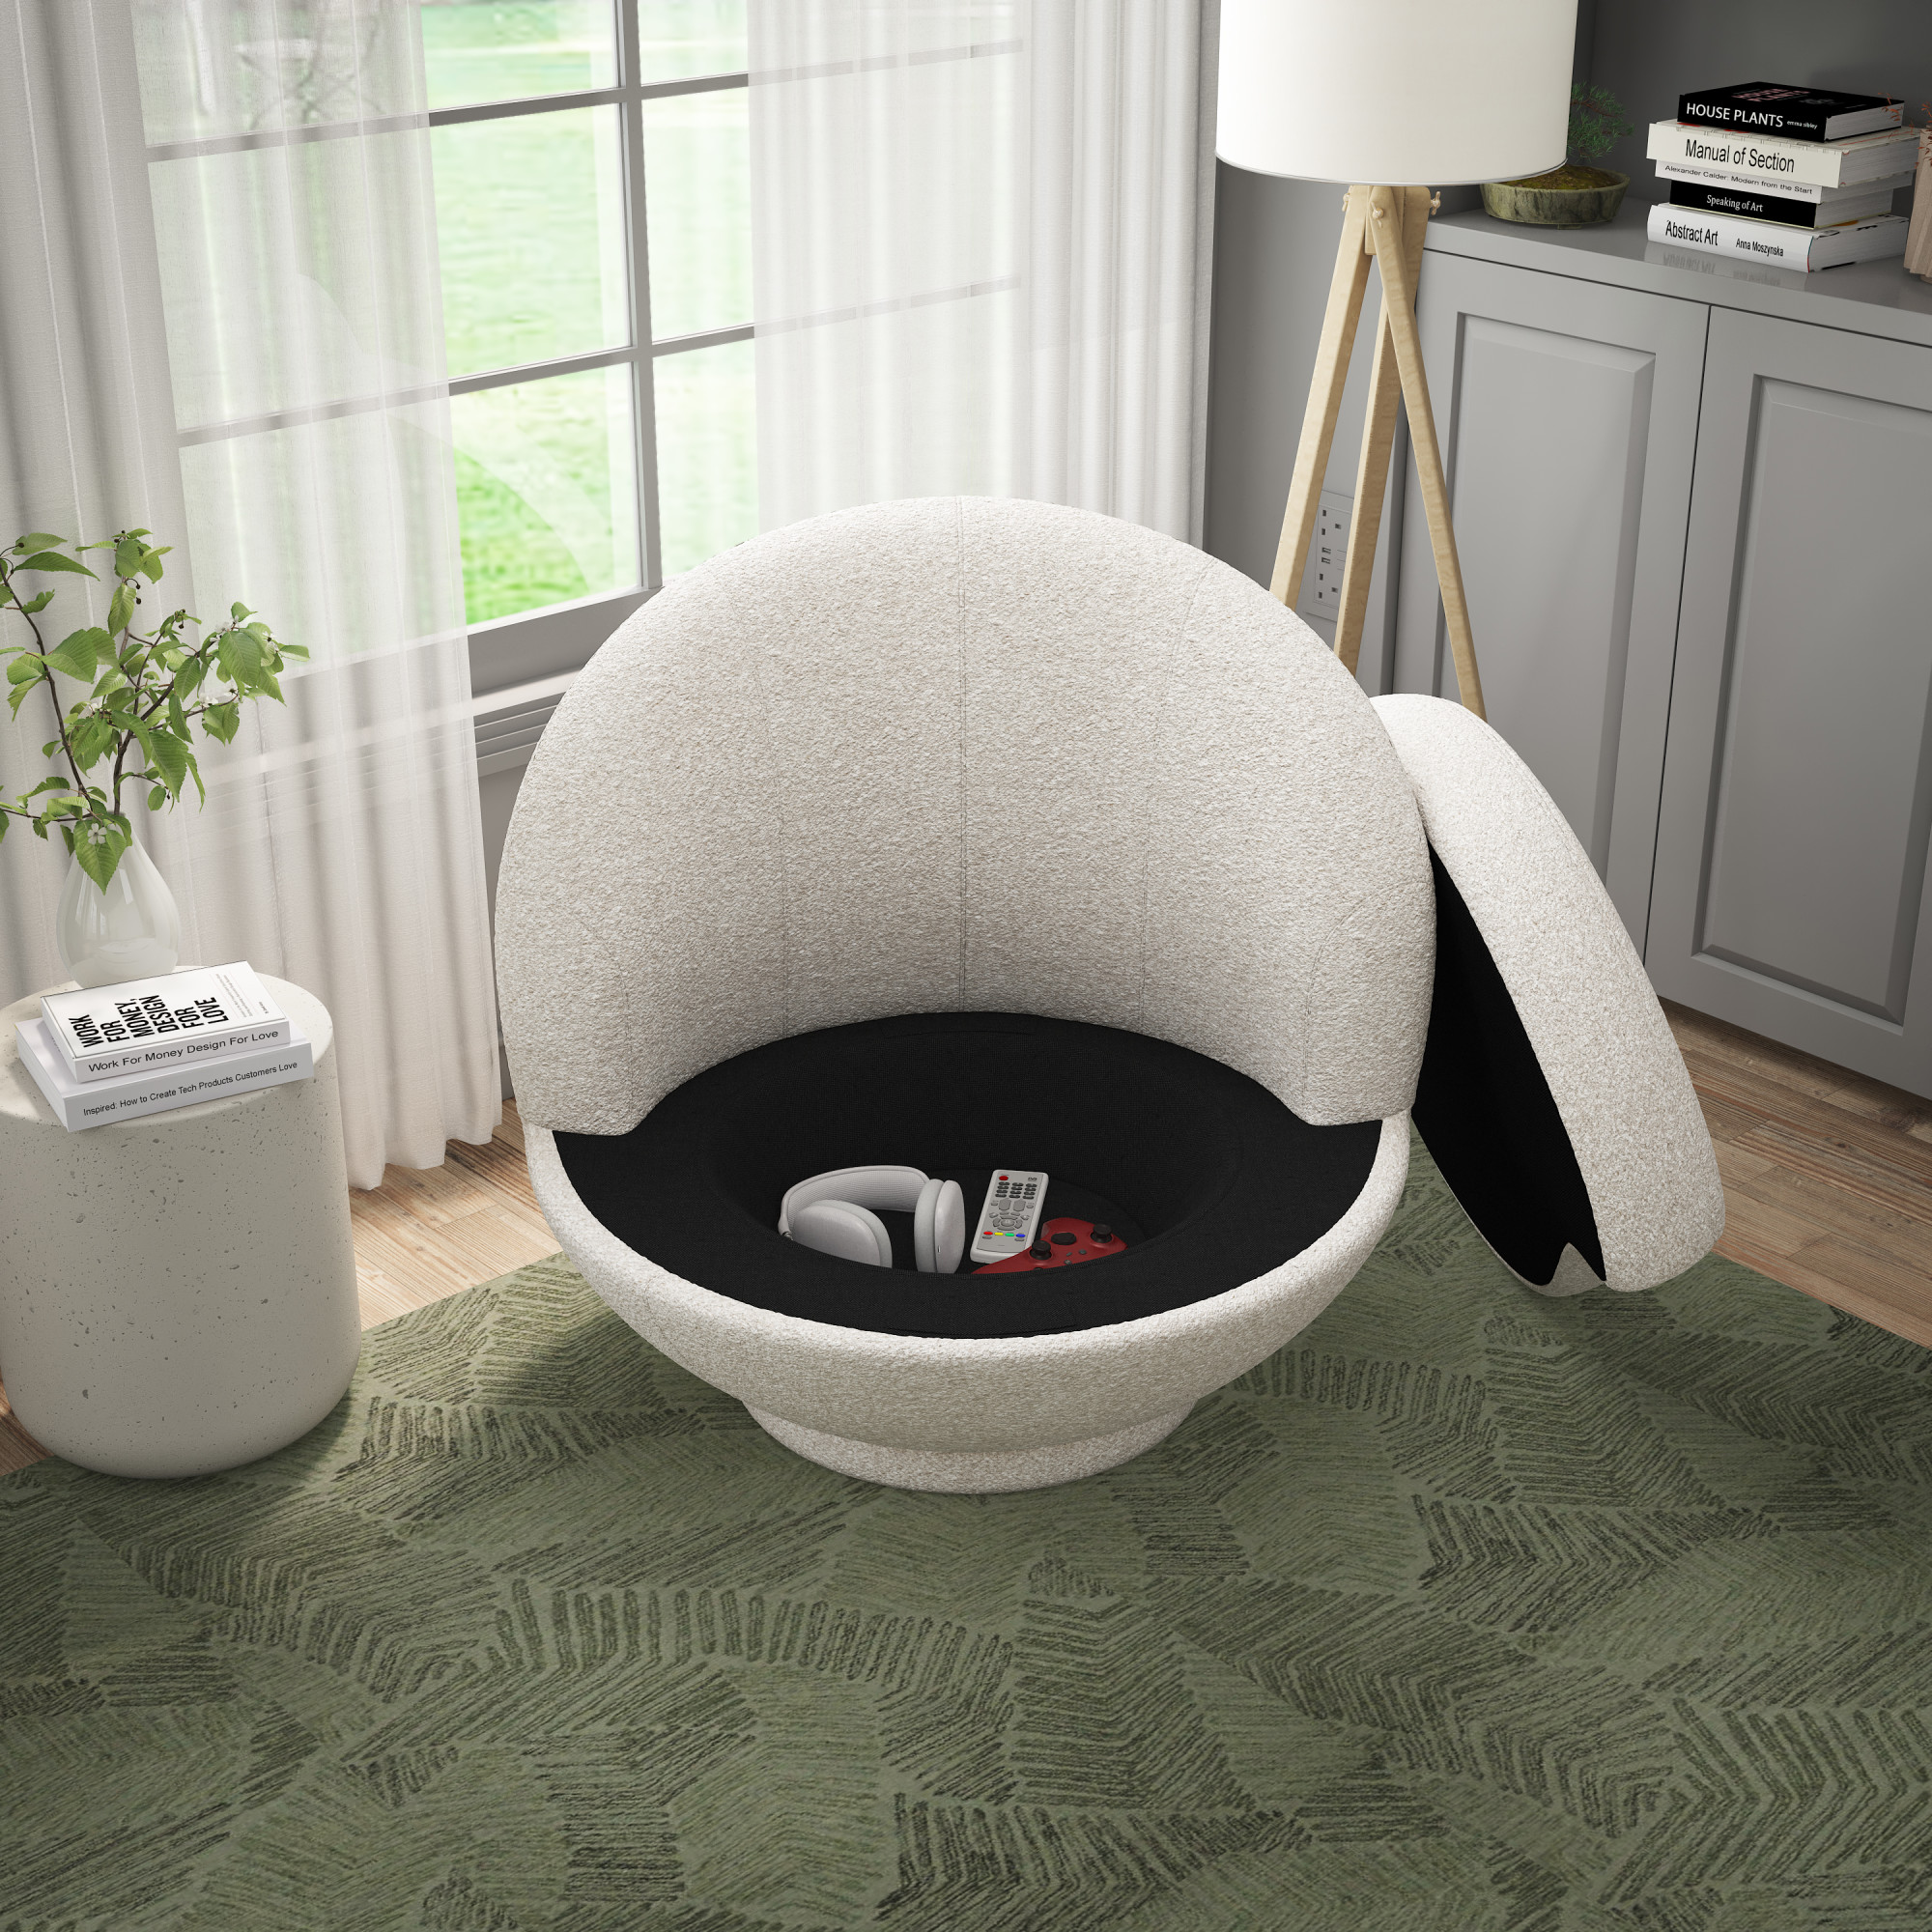 Hillsdale Boulder Upholstered Swivel Storage Chair, Ash White - image 5 of 22